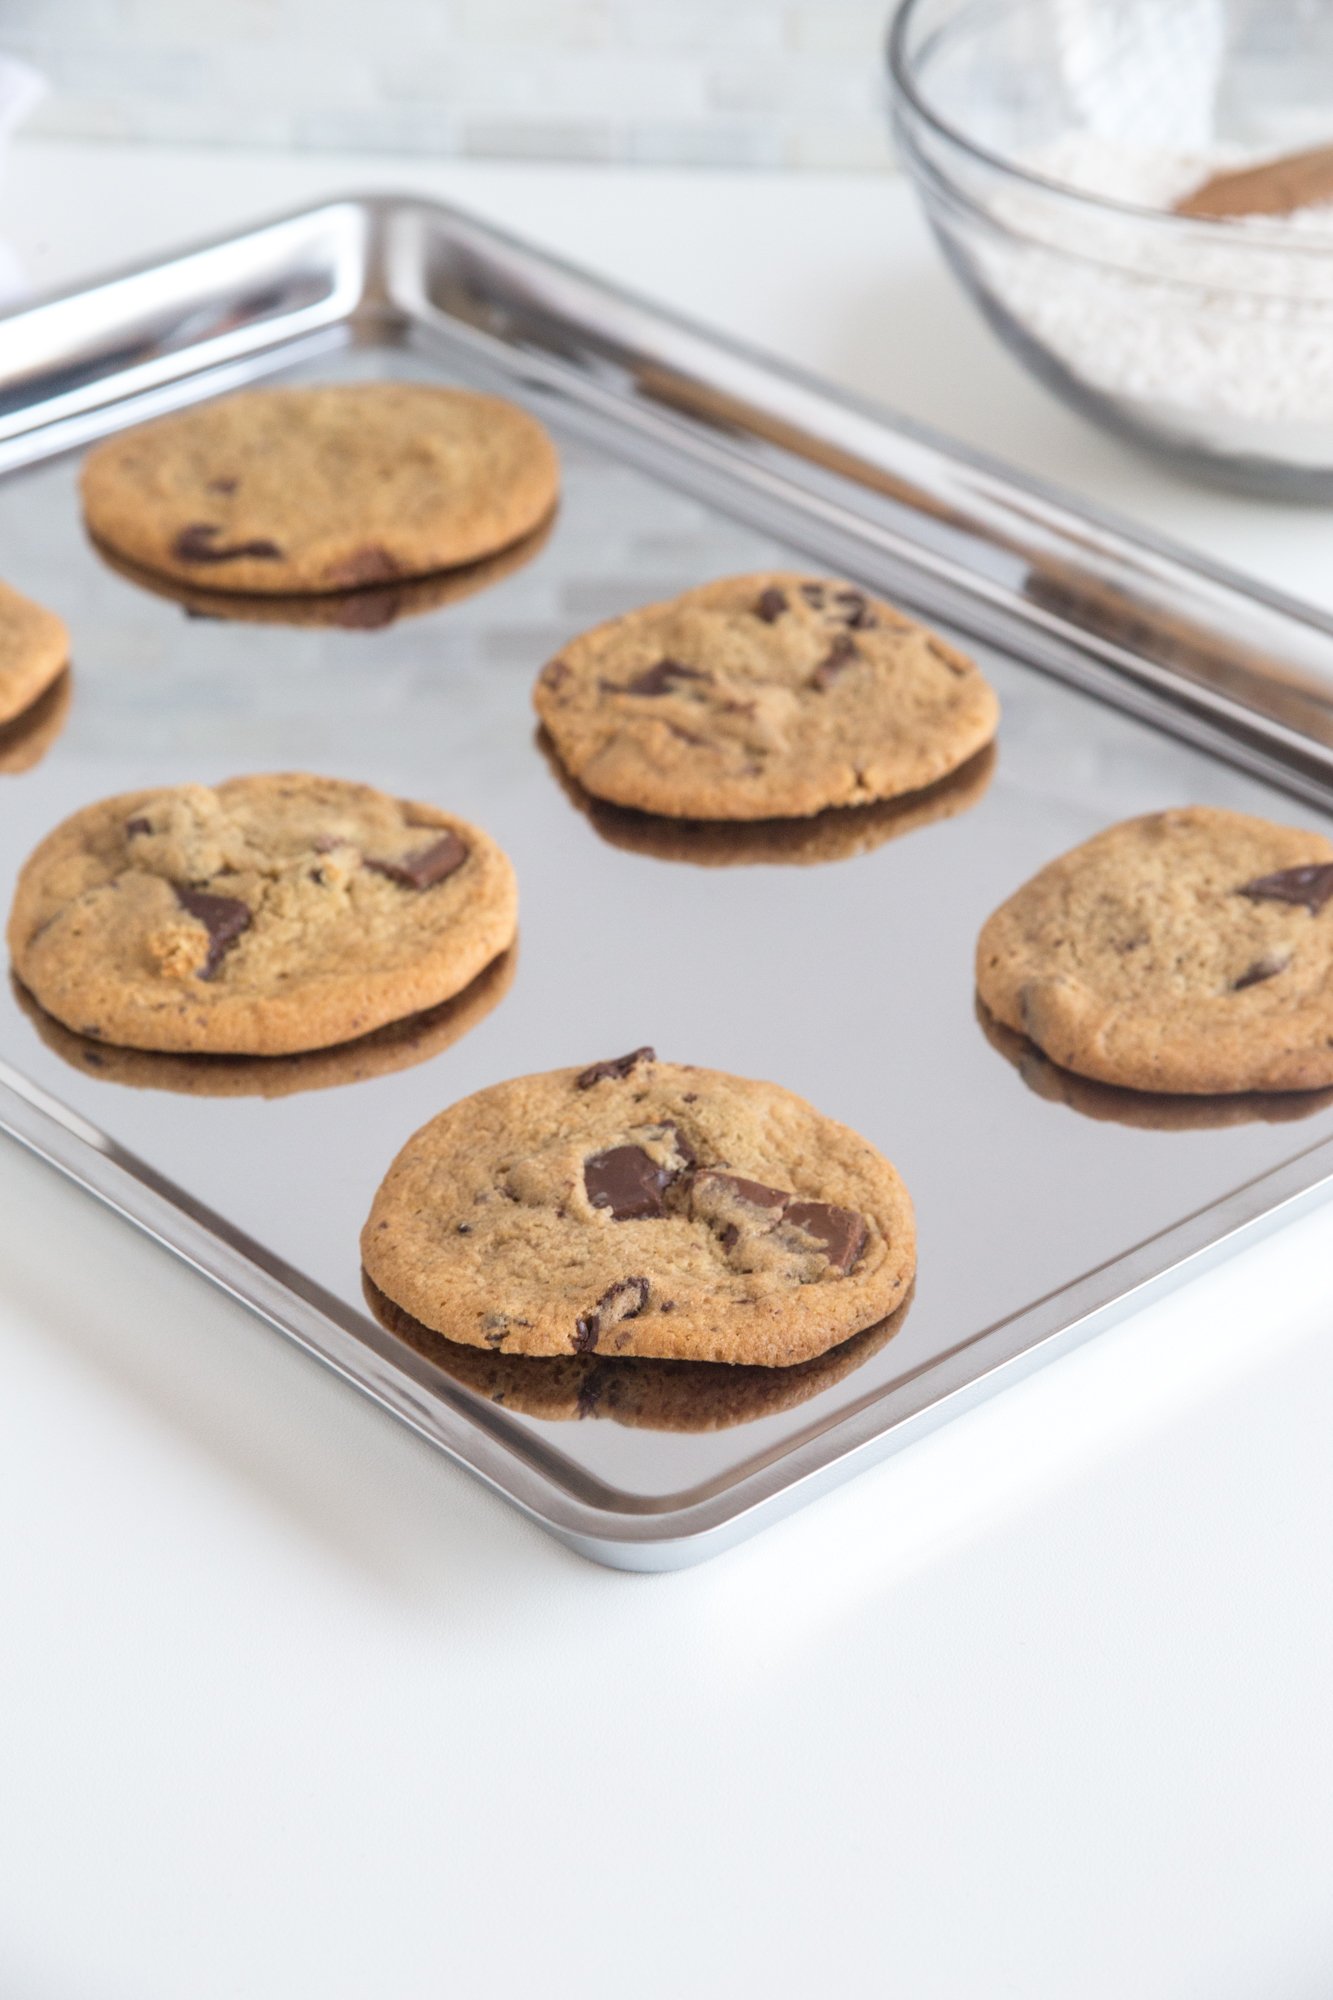 Fox Run Stainless Steel Jelly Roll Pan & Cookie Baking Sheet, 16.25 x 11.25 x 0.75 inches